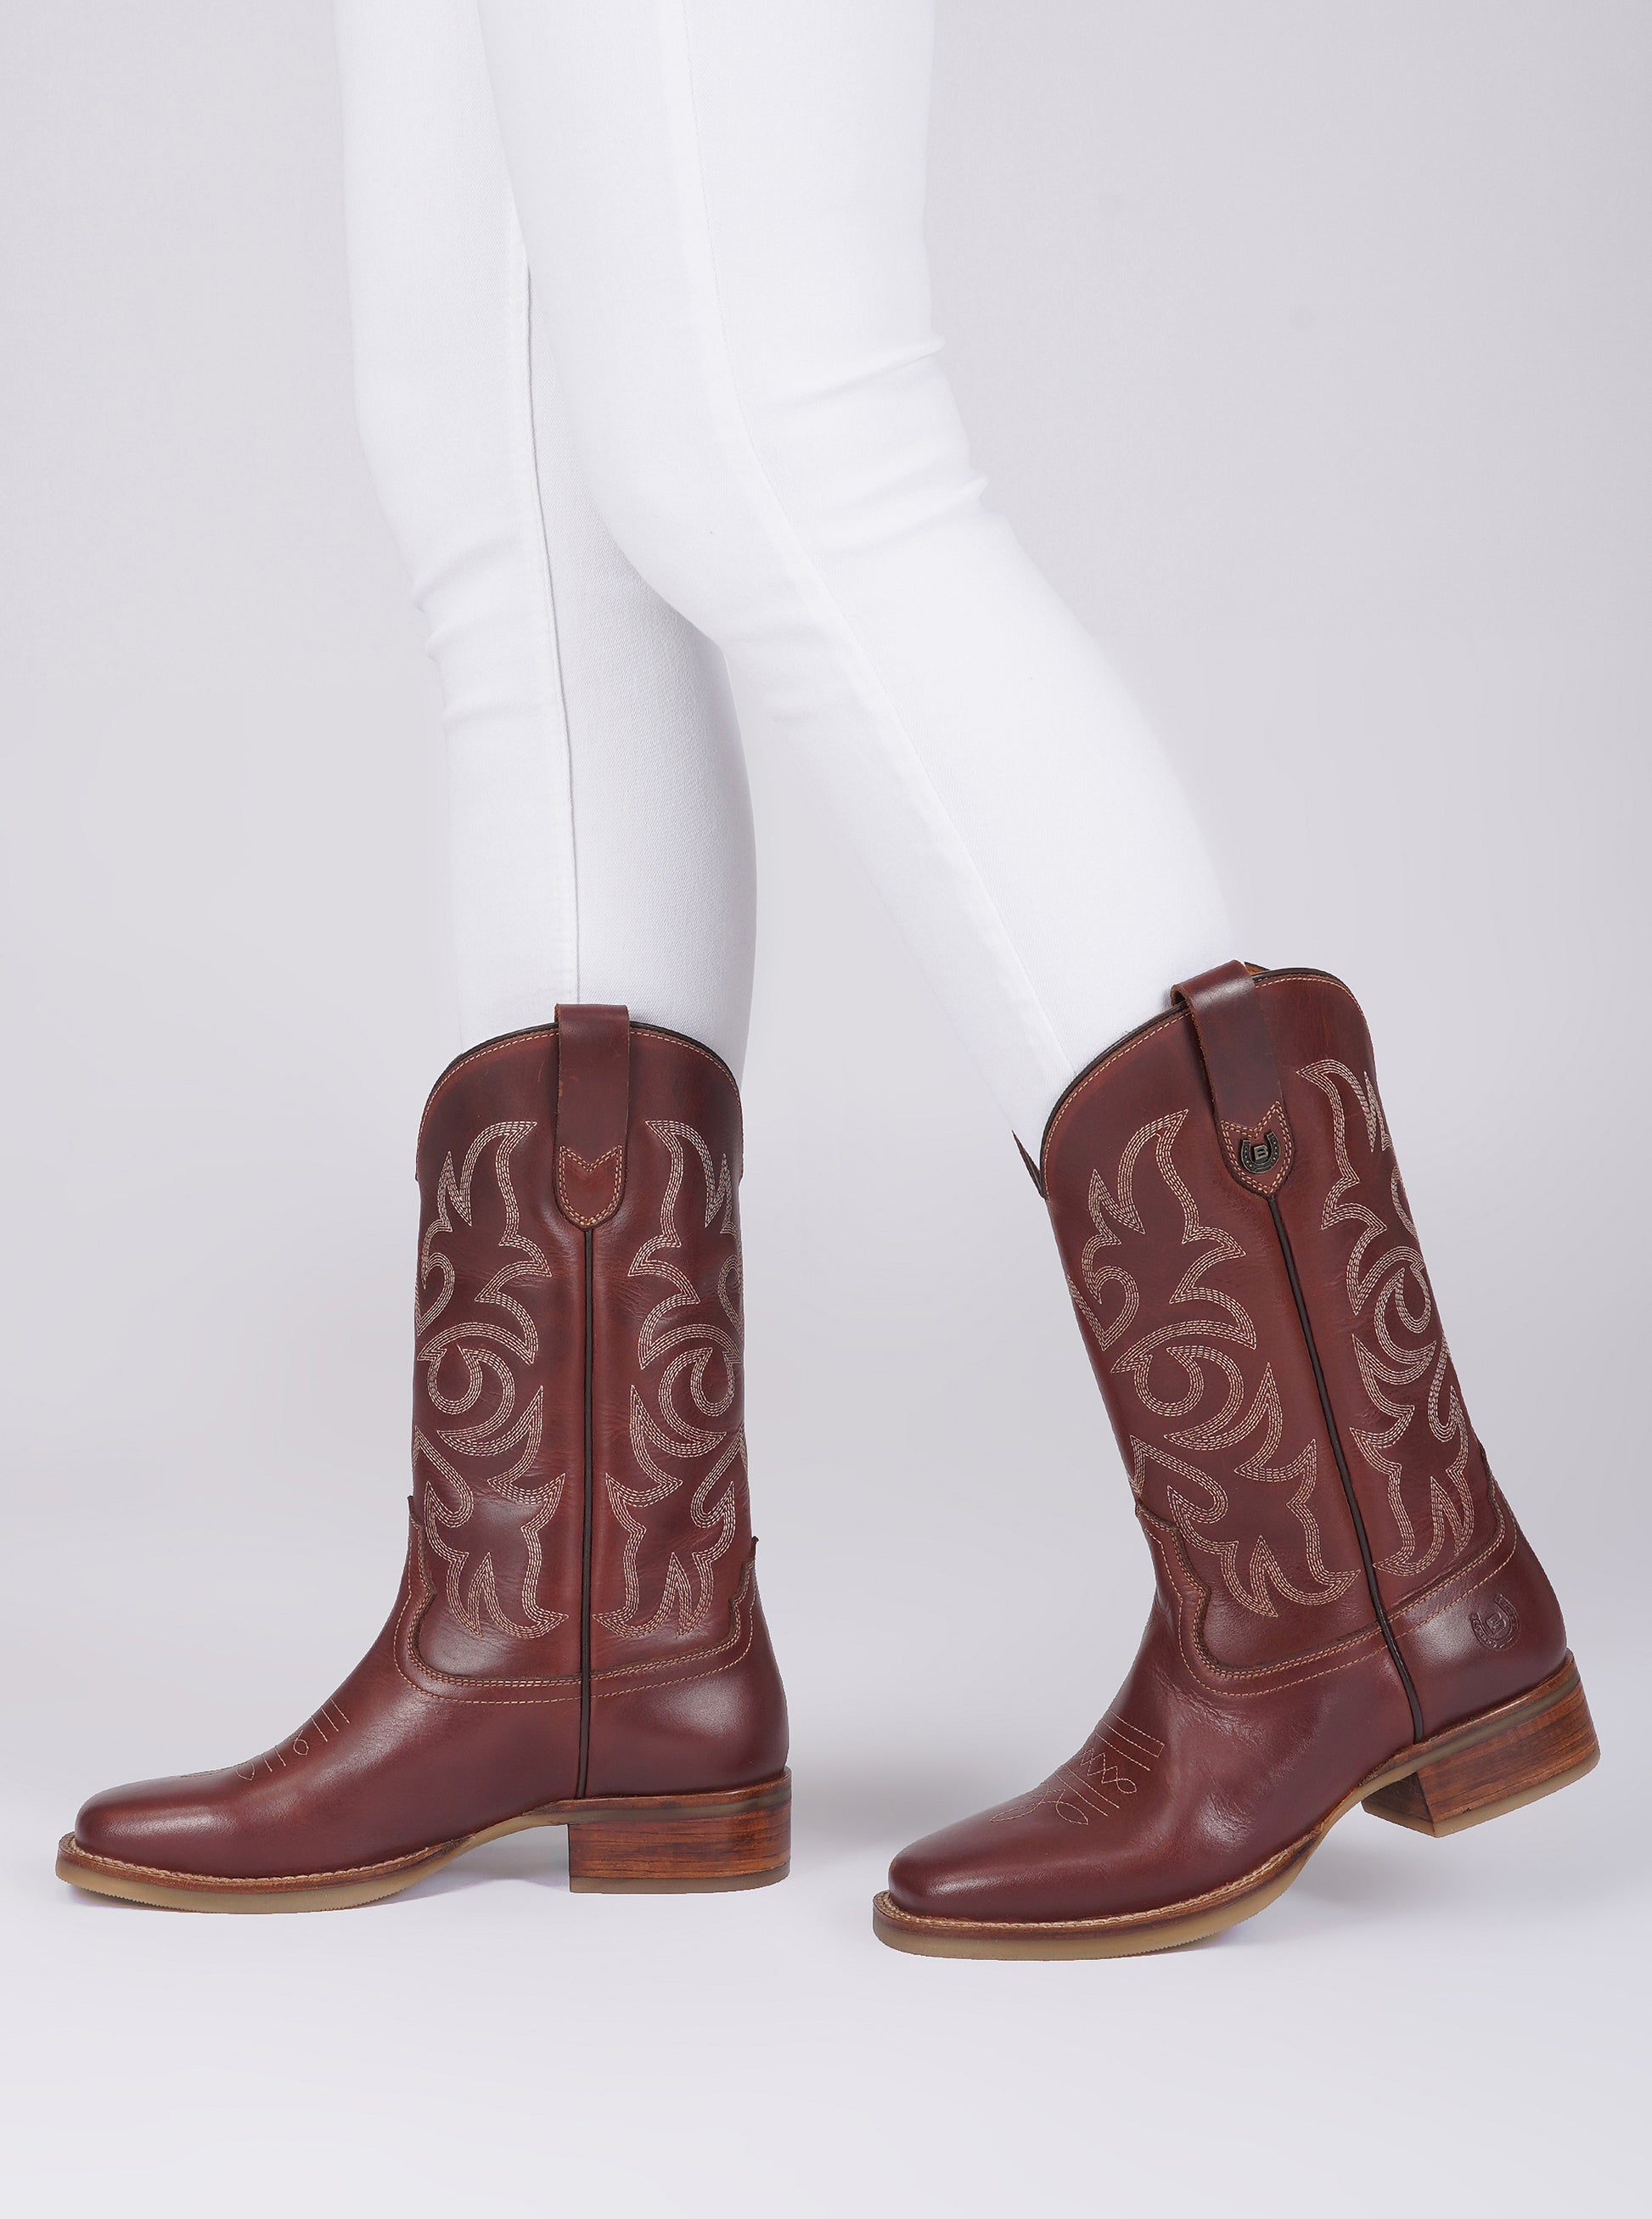 KENTUCKY - Heritage, ankle riding boots.